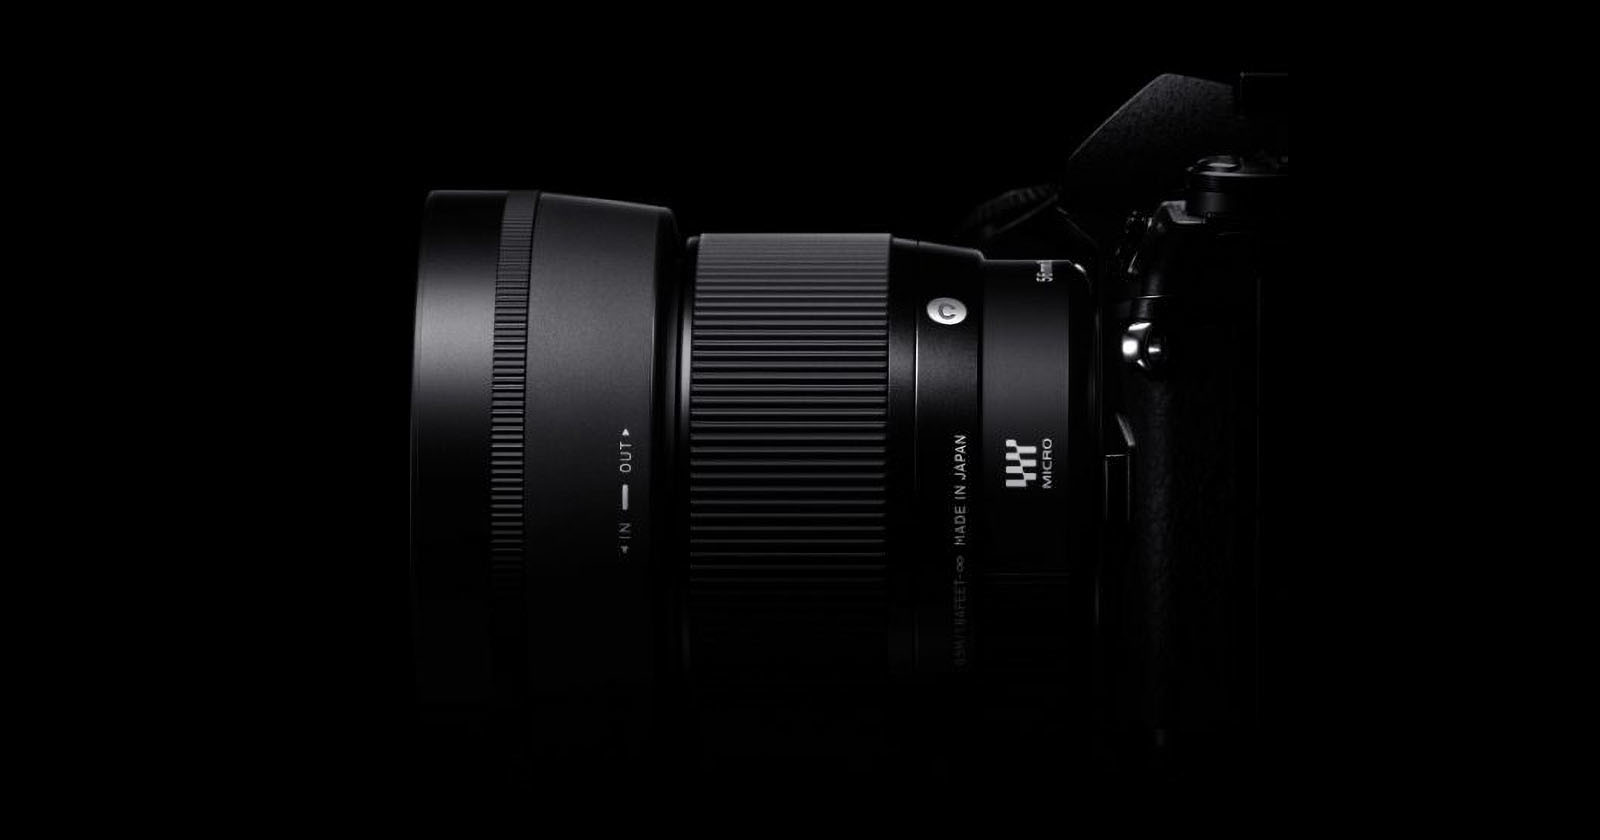 Sigma Wont Make New Lenses for Micro Four Thirds as Demand Dips